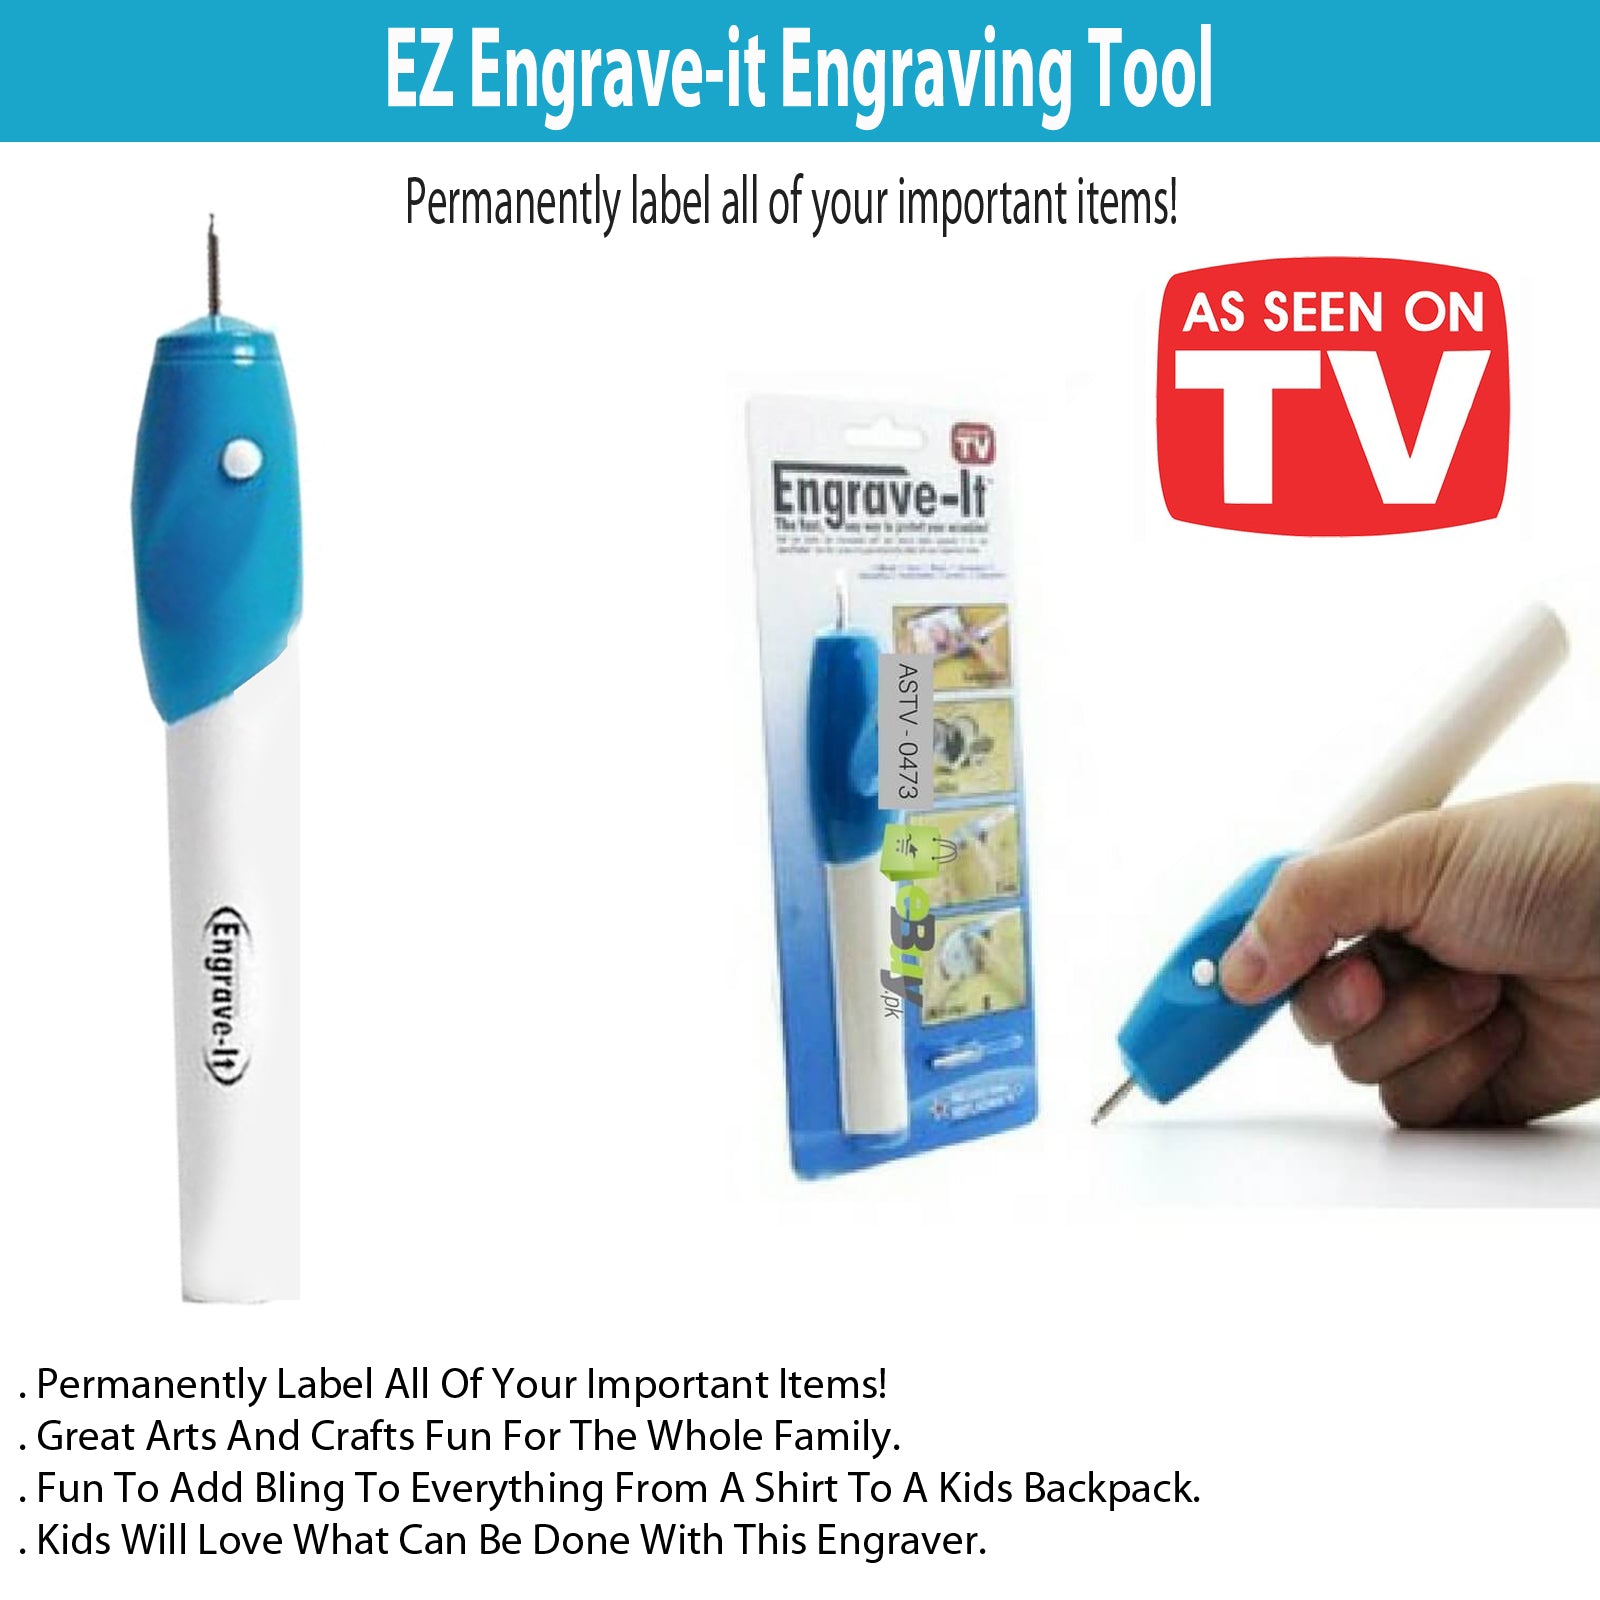 EZ Engrave-It Engraving Tool Arts And Crafts Fun